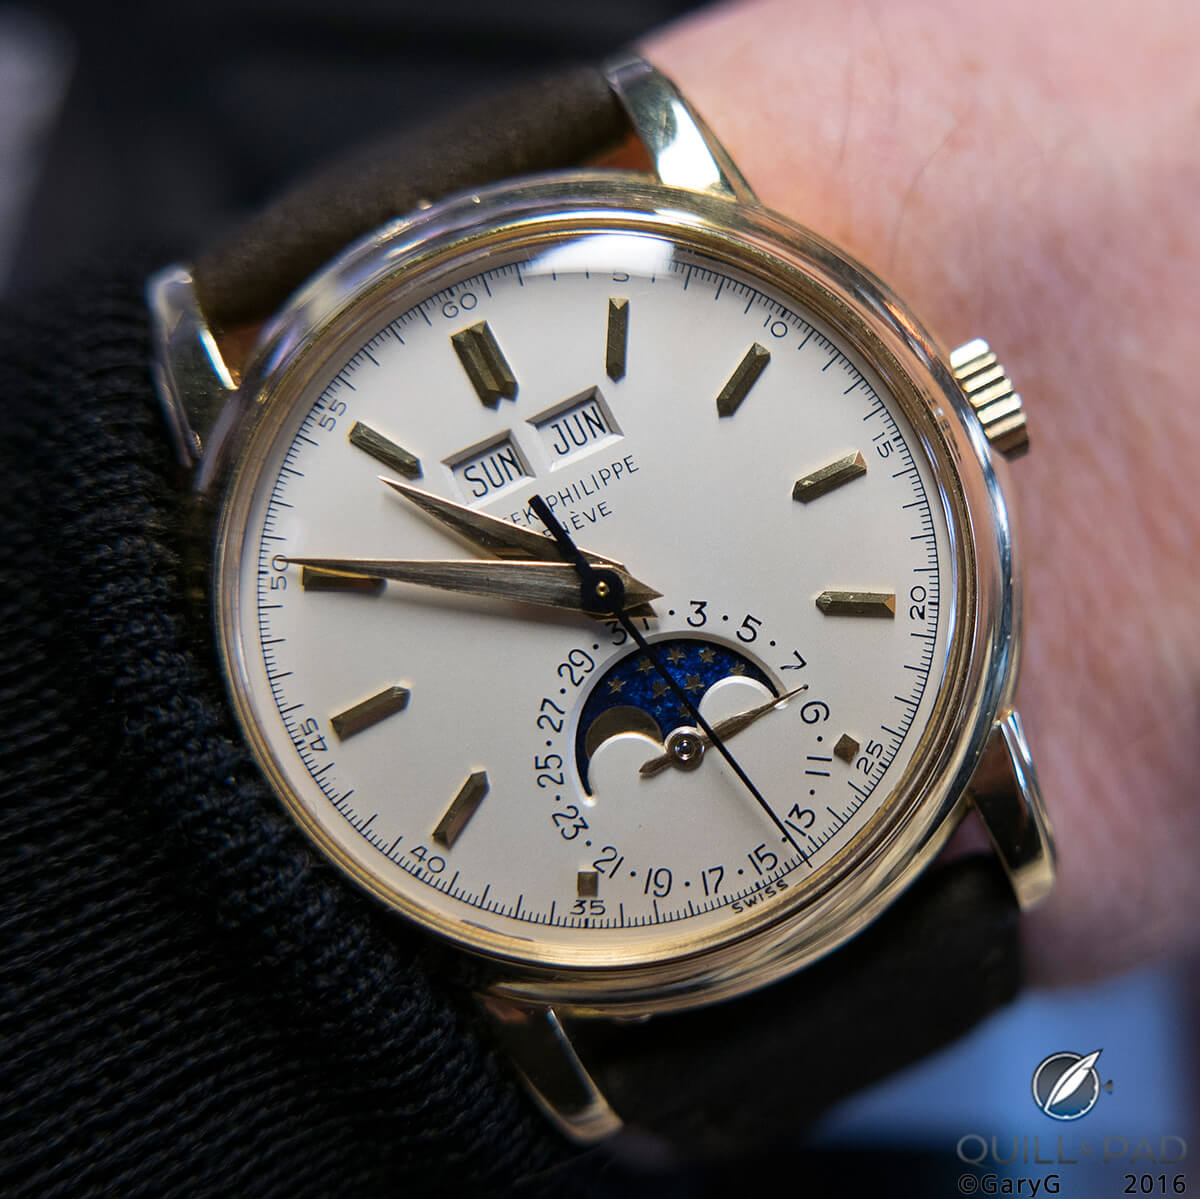 Maybe next time: a Patek Philippe Reference 2438-1 from the Phillips Geneva Auction: Four